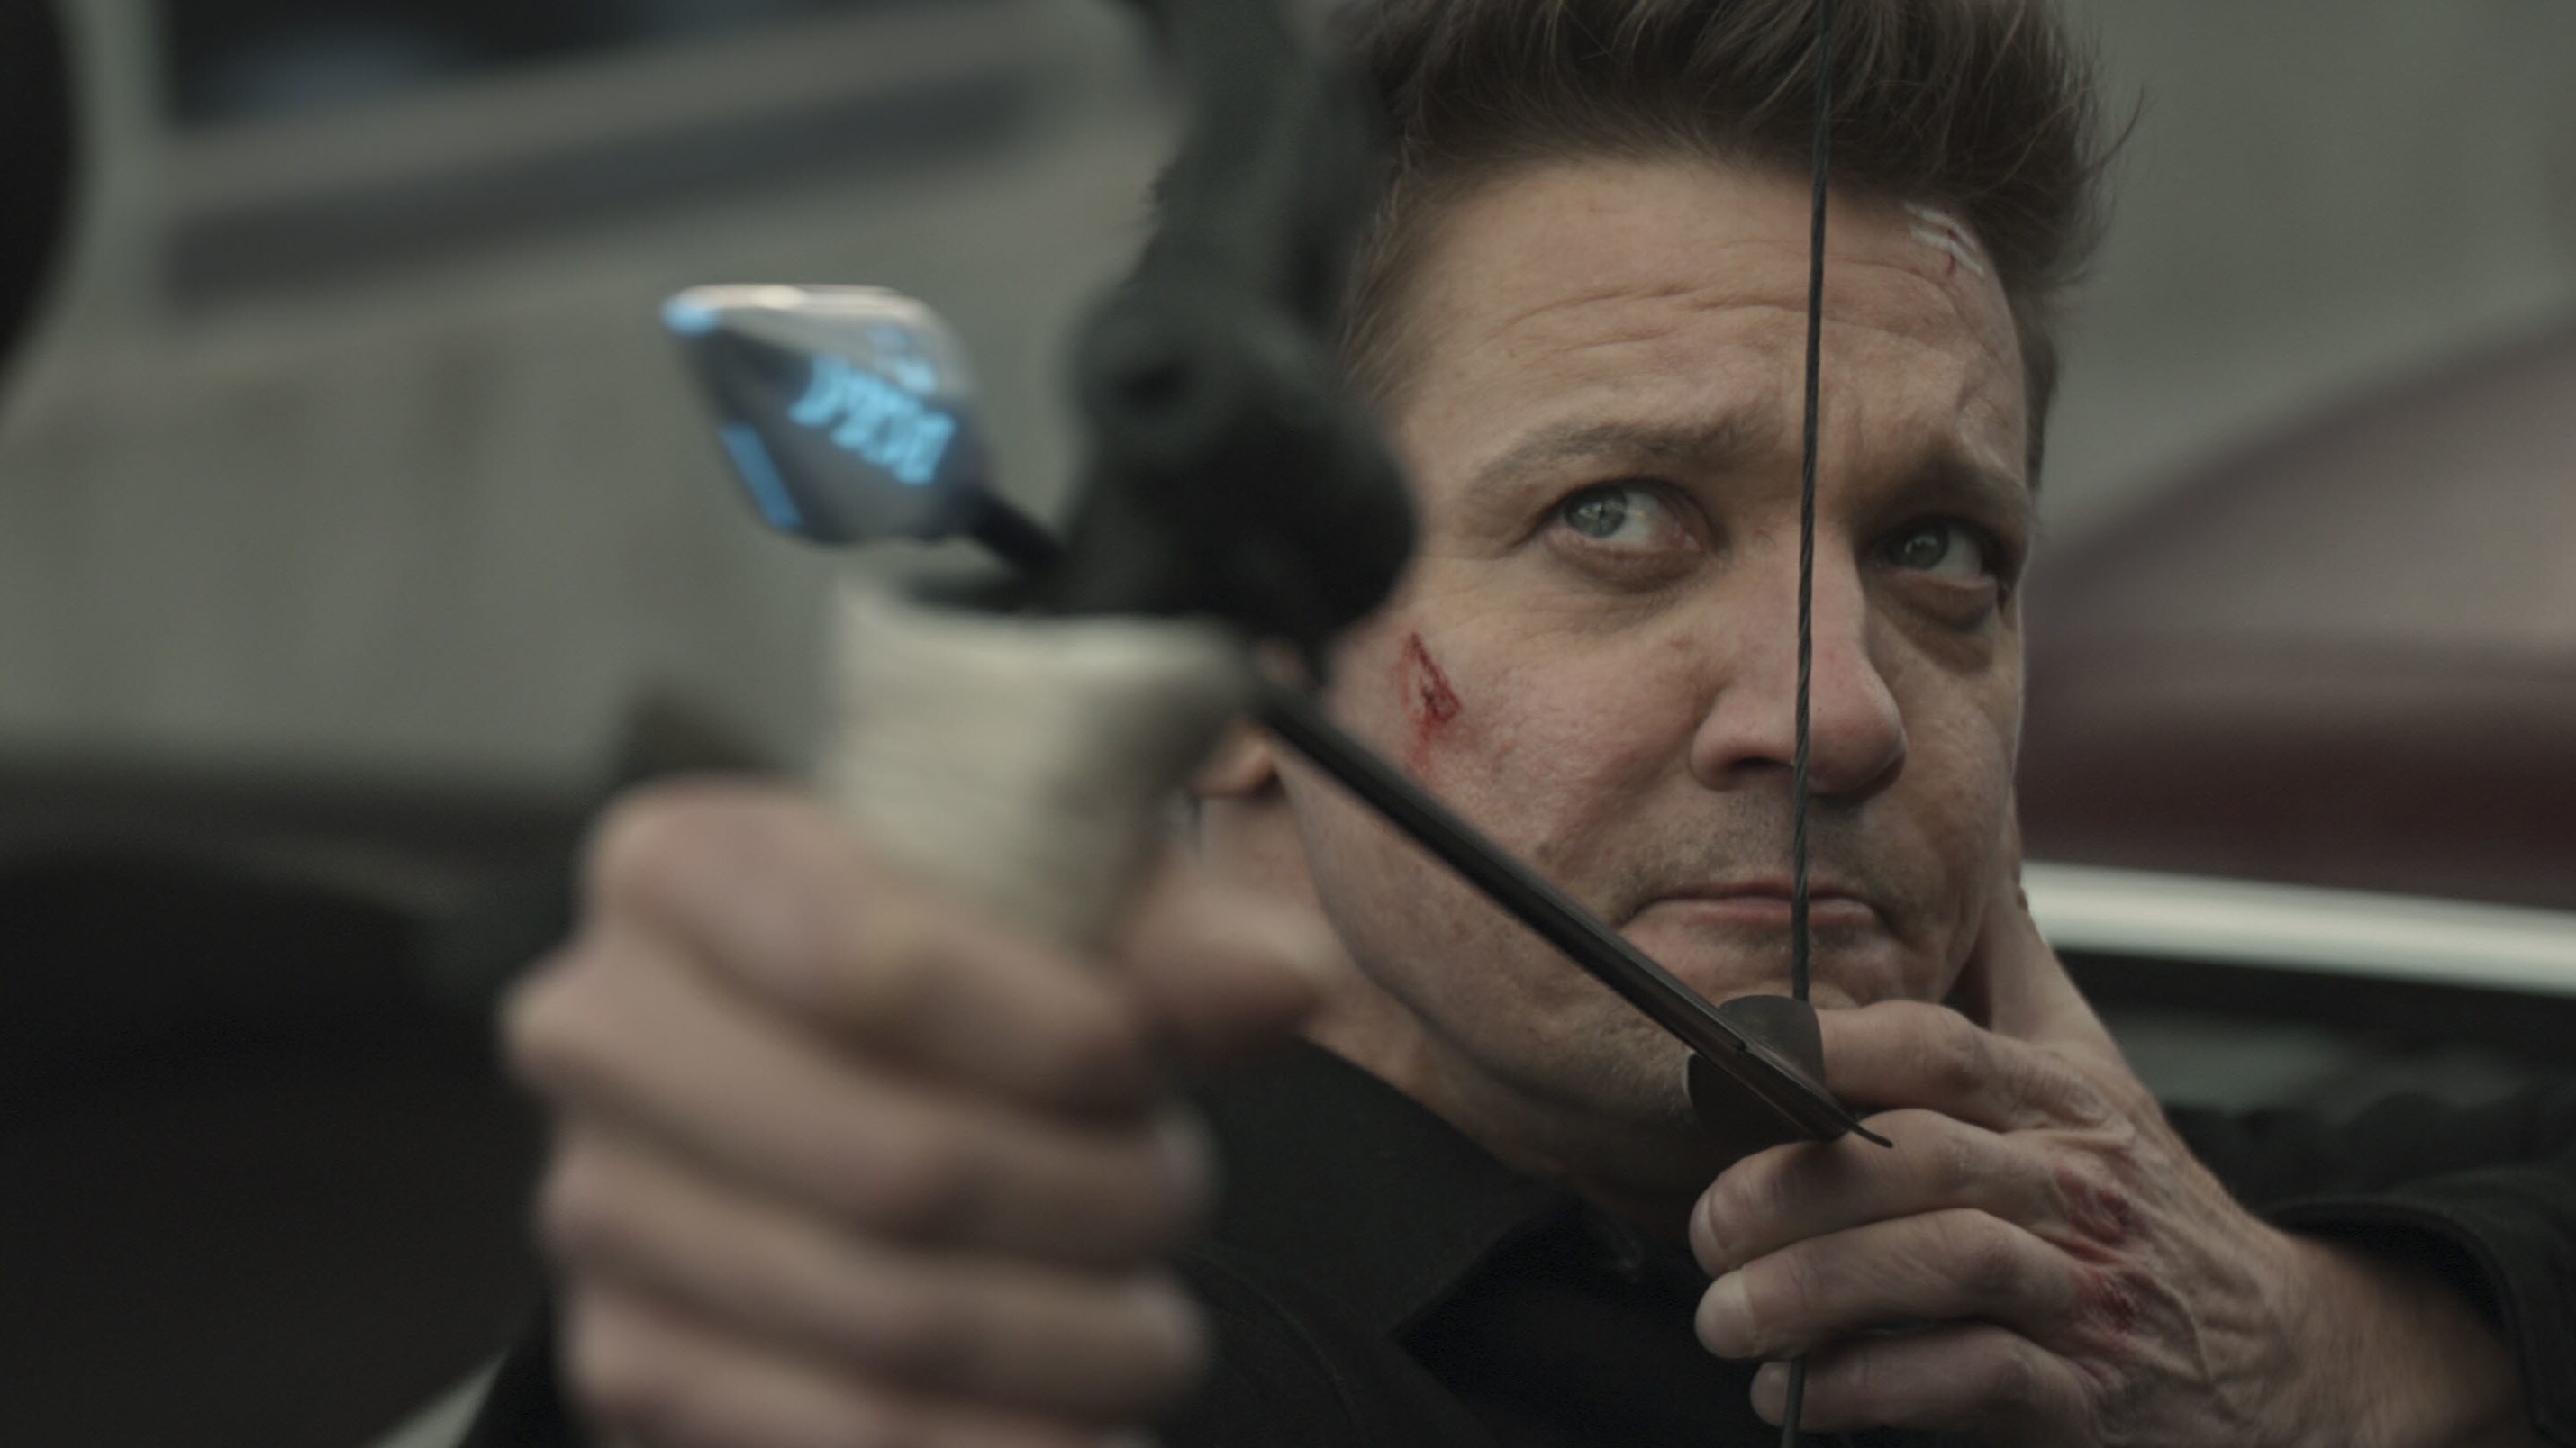 Jeremy Renner as Clint Barton/Hawkeye. Photo courtesy of Marvel Studios. ©Marvel Studios 2021. All Rights Reserved.